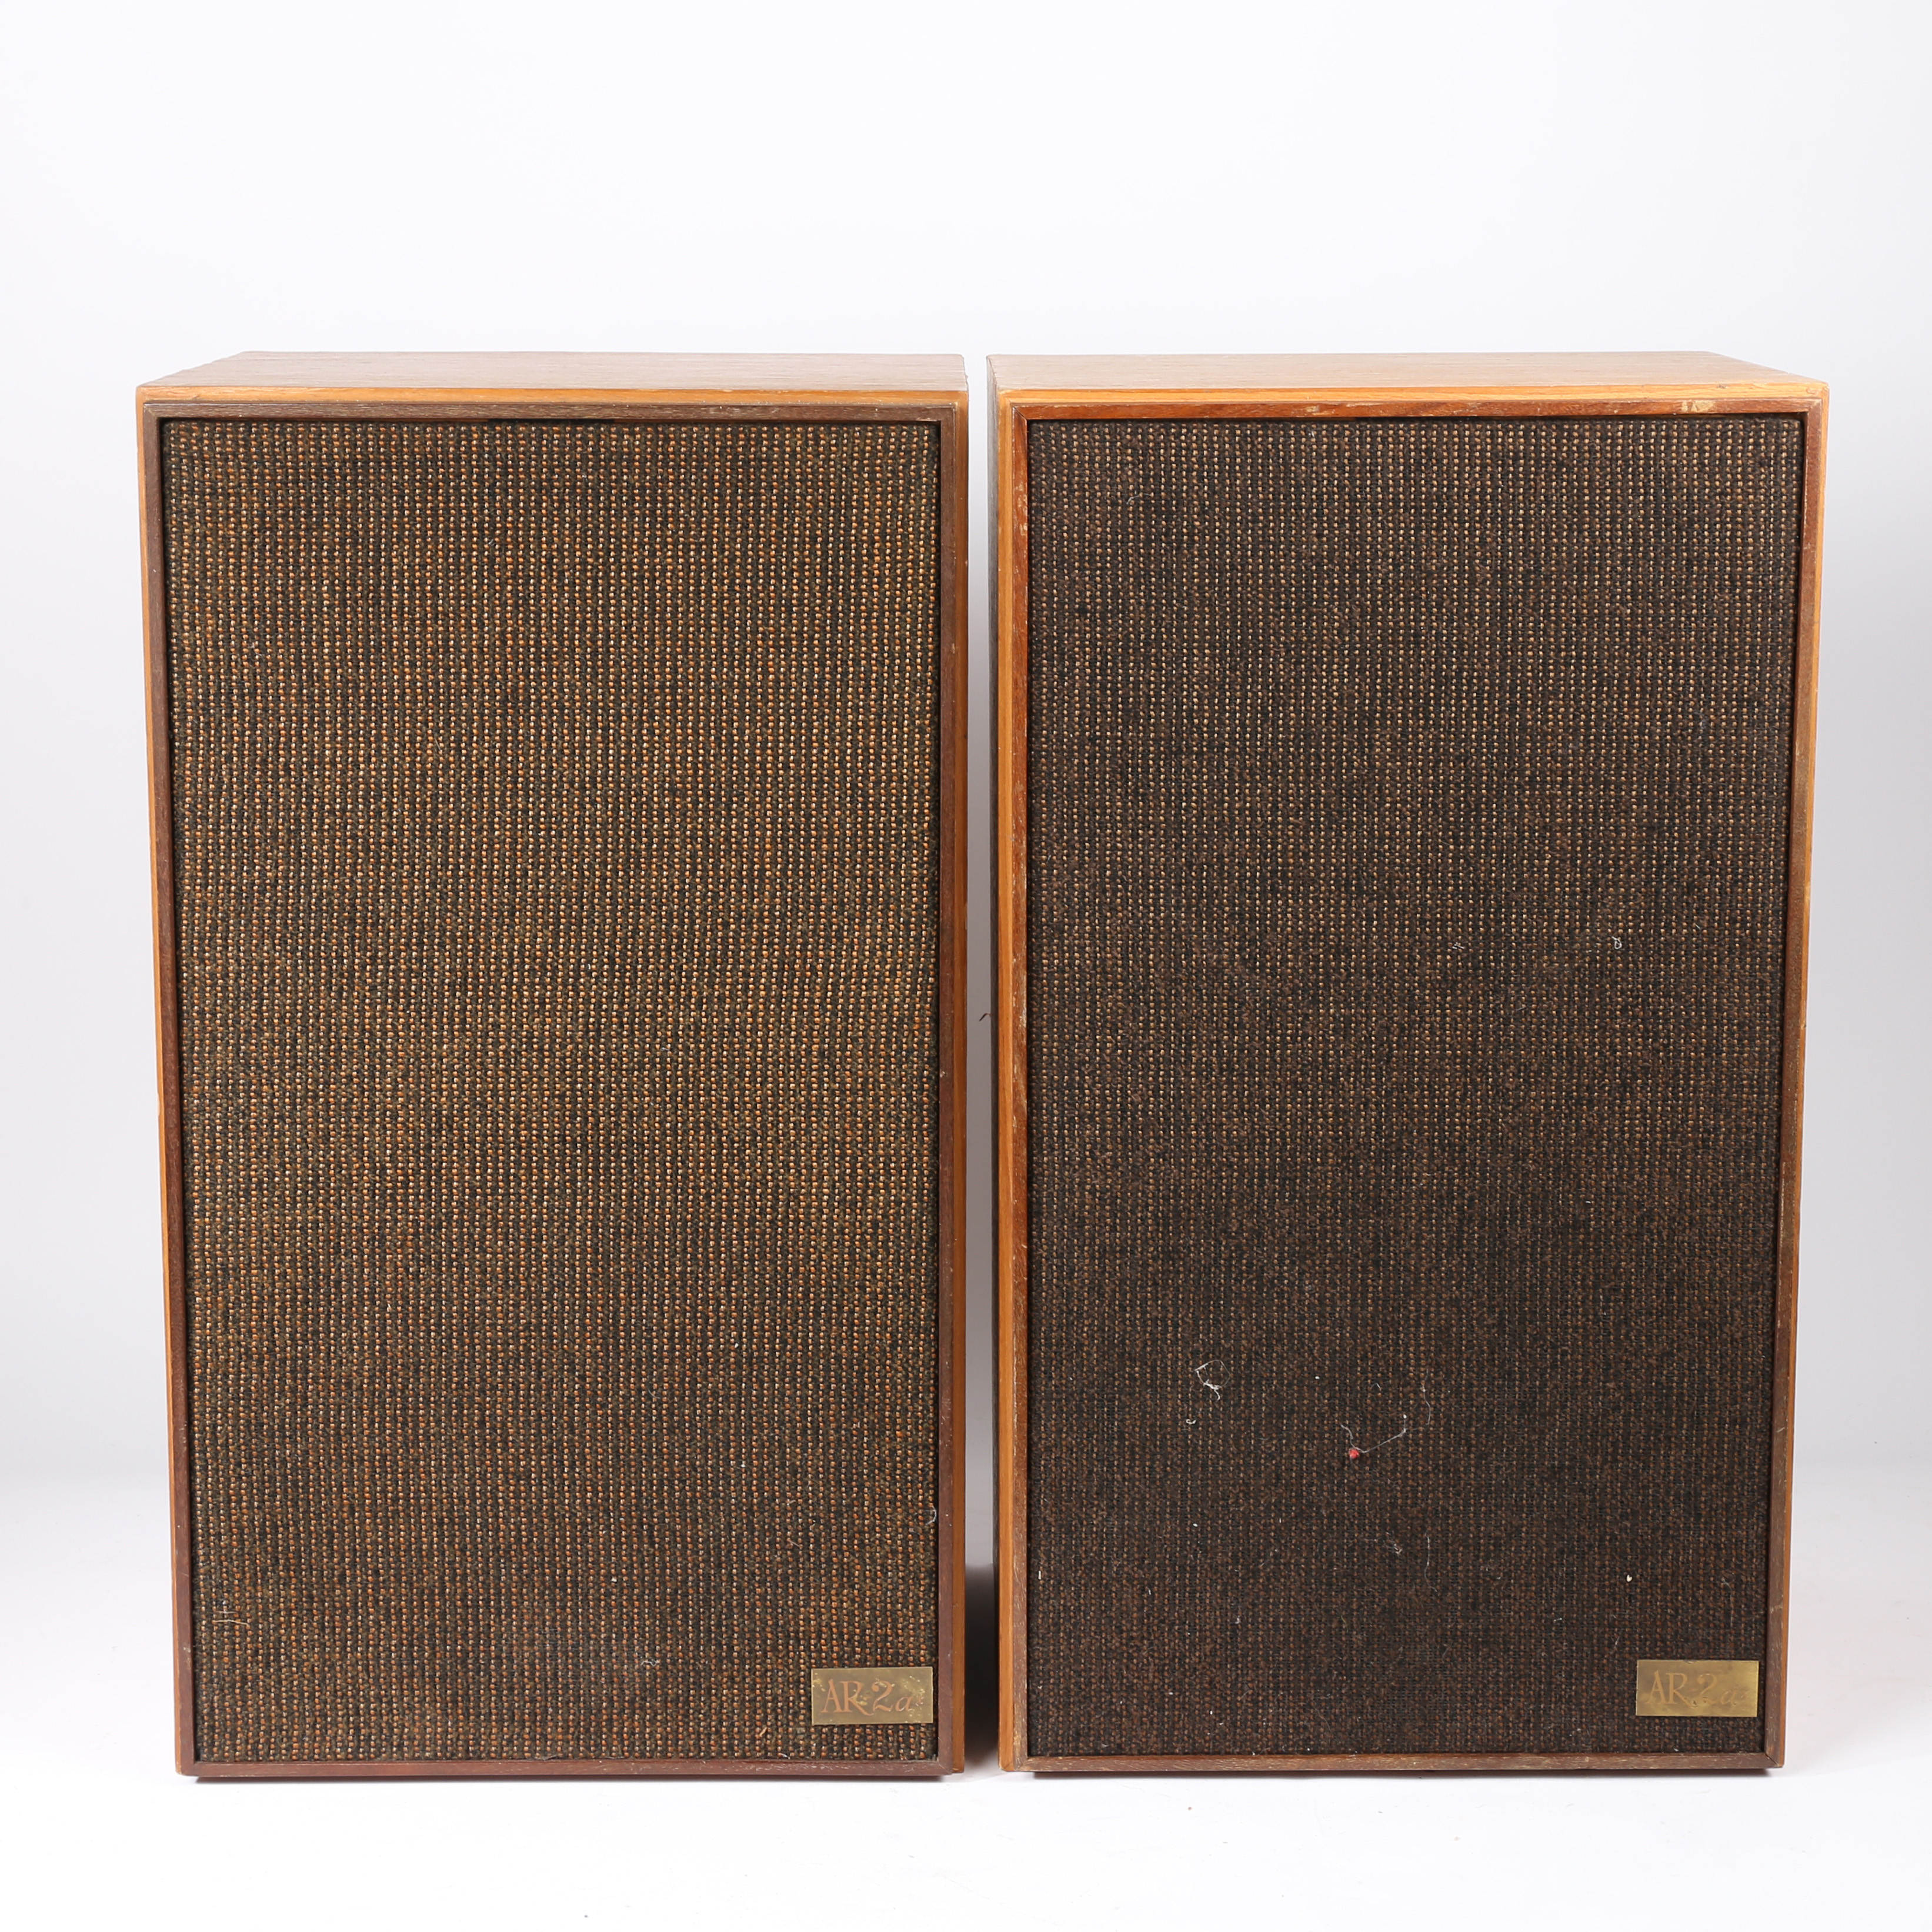 A PAIR OF ACCOUSTIC RESEARCH AR-2AX SPEAKERS.